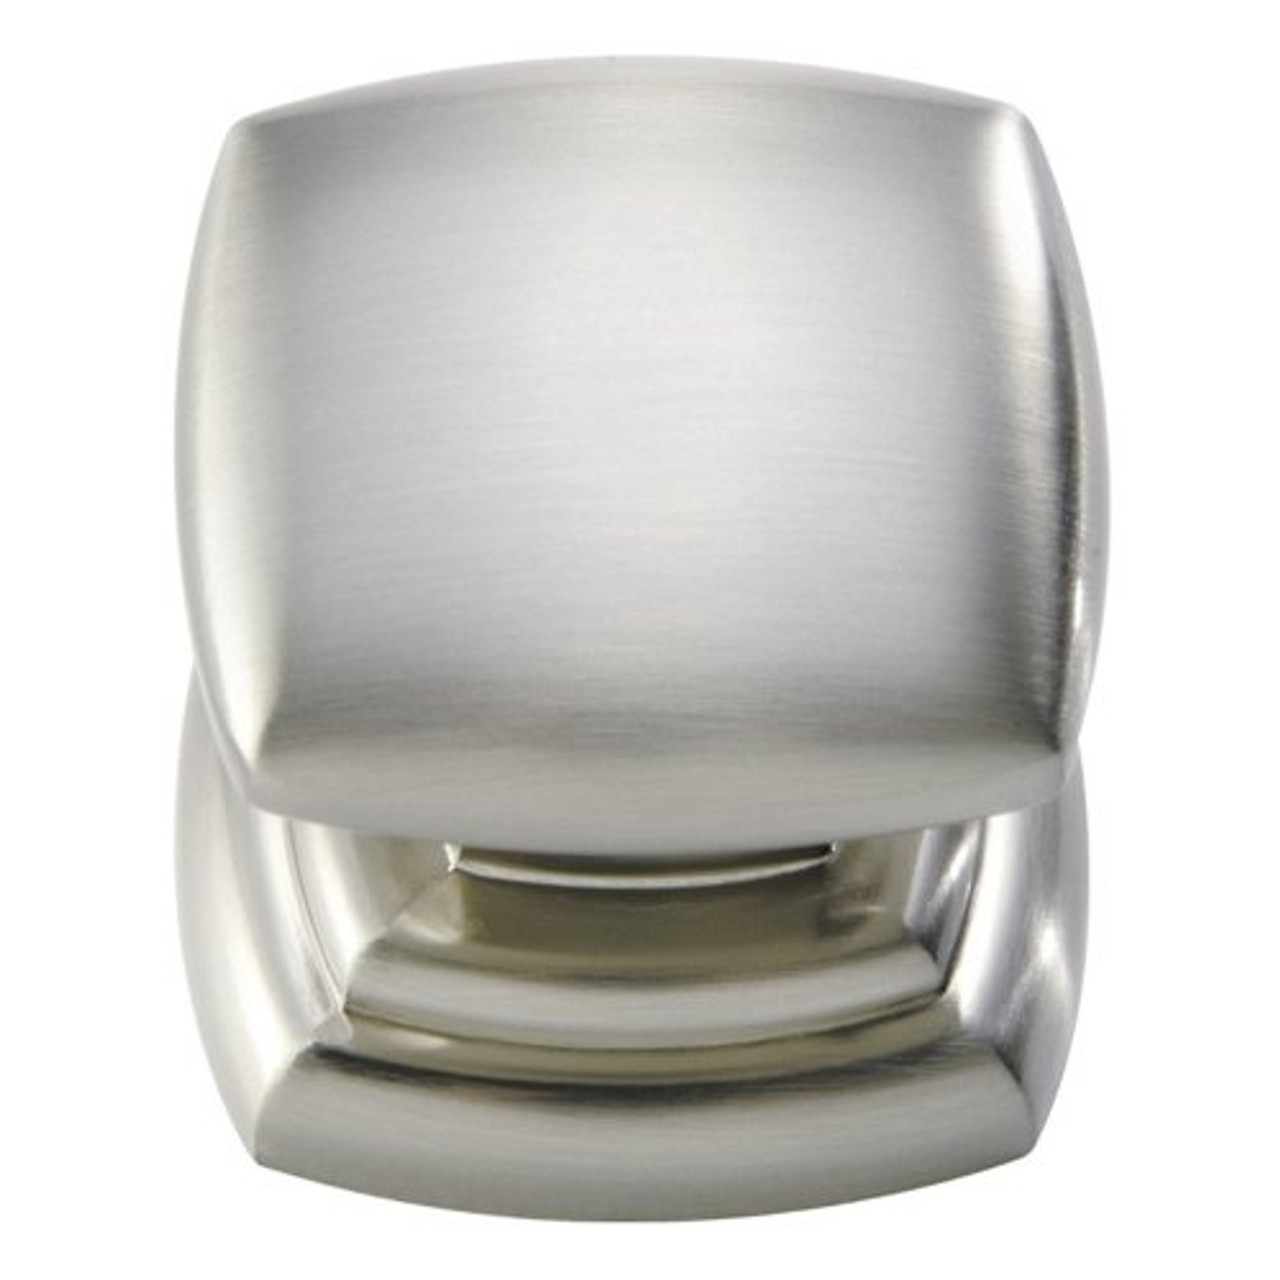 Hickory Hardware 1-1/4 INCH (32MM) EURO-CONTEMPORARY CABINET KNOB